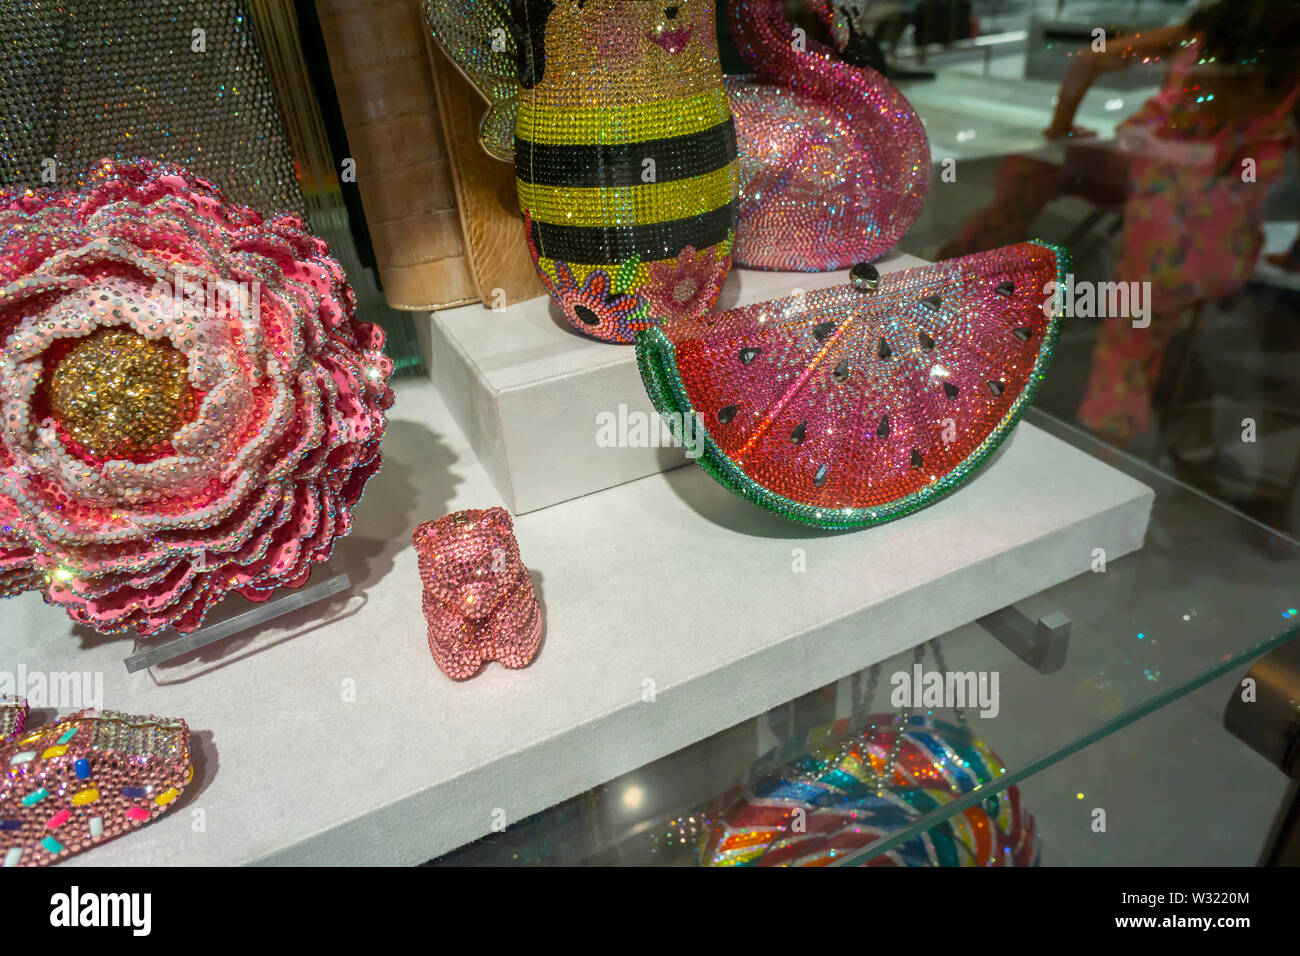 Judith Leiber brand designer handbags in the luxury goods retailer Neiman Marcus department store in the Hudson Yards mall on the West Side of Manhattan on Sunday, July 7, 2019.   (© Richard B. Levine) Stock Photo